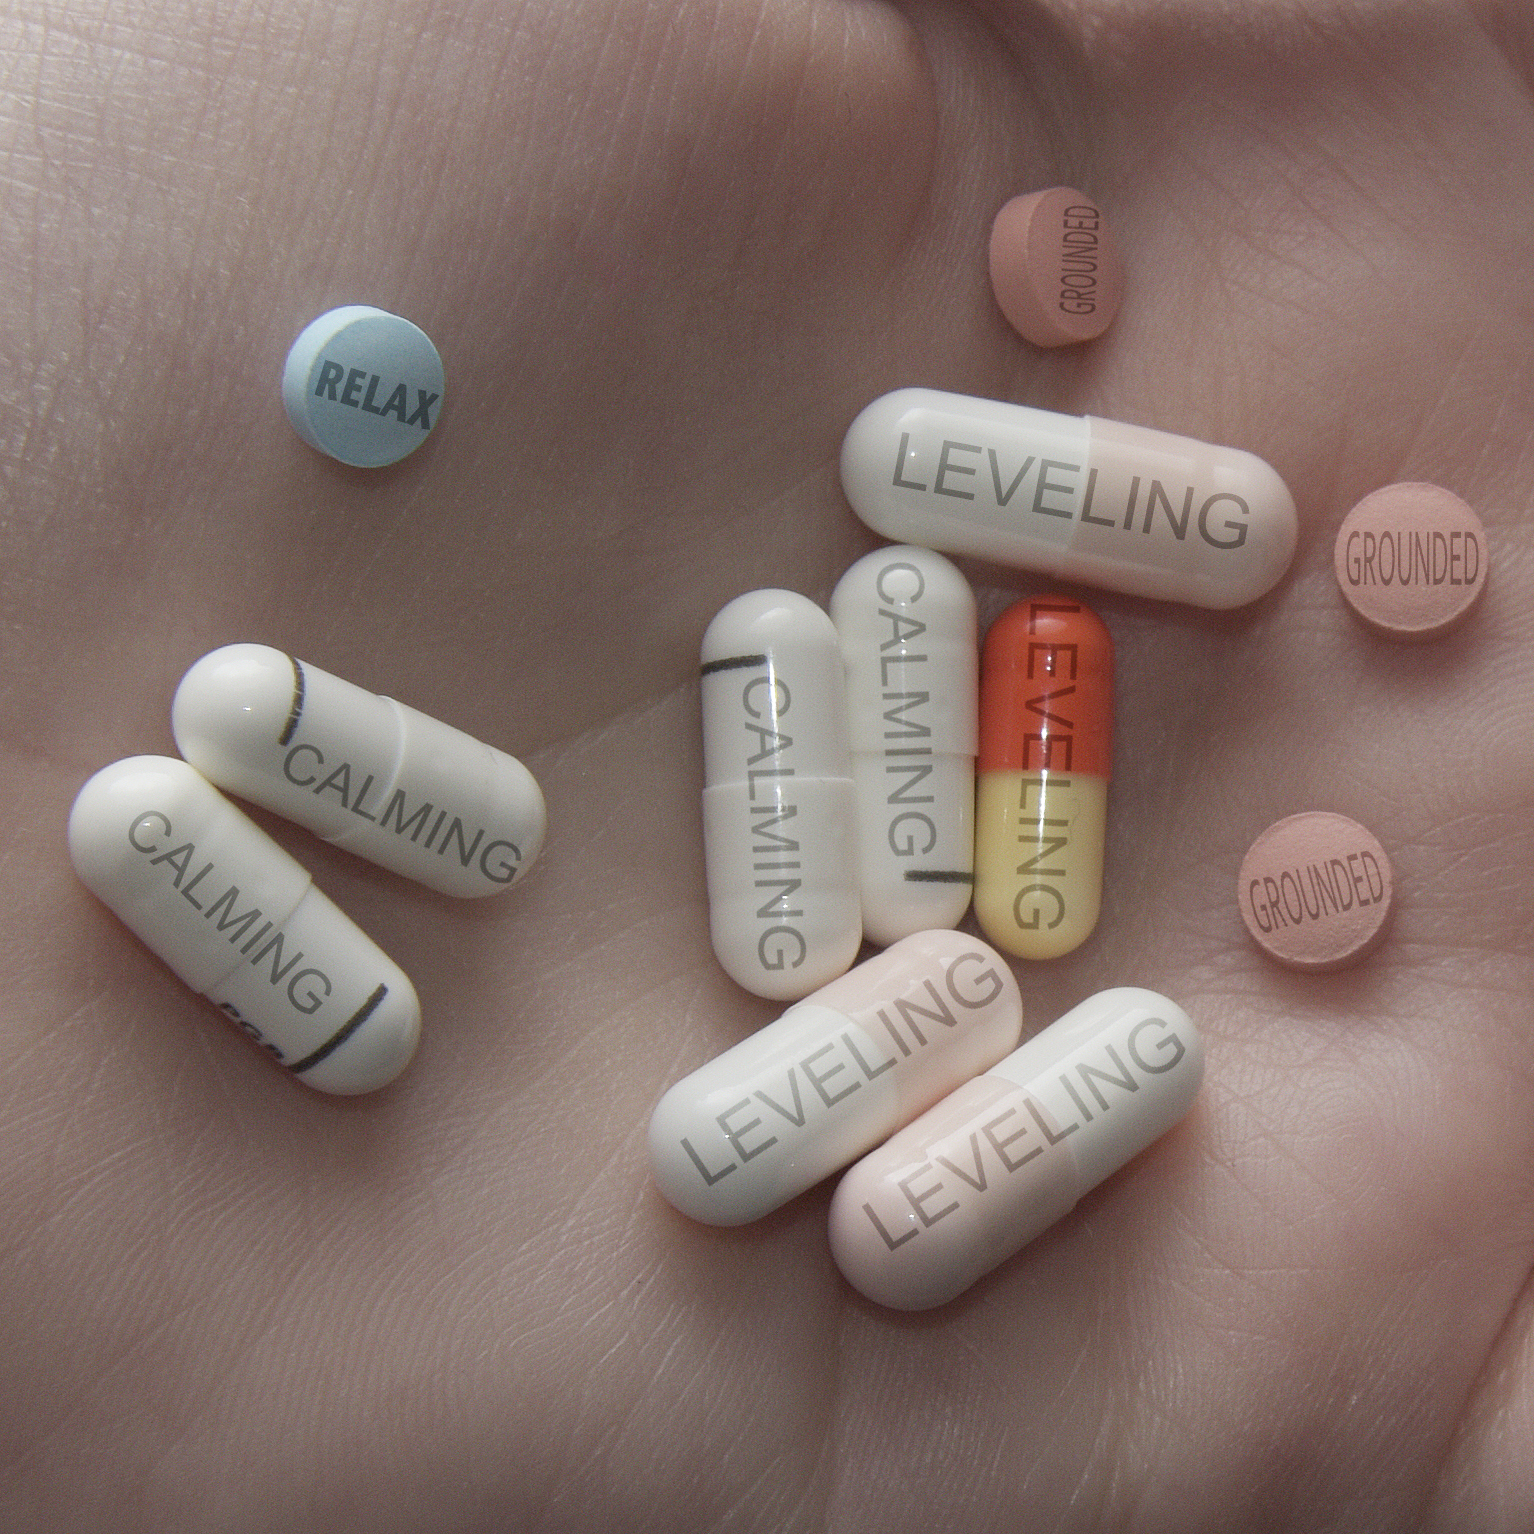 Image of pills, with words like Calming and Levelling on them